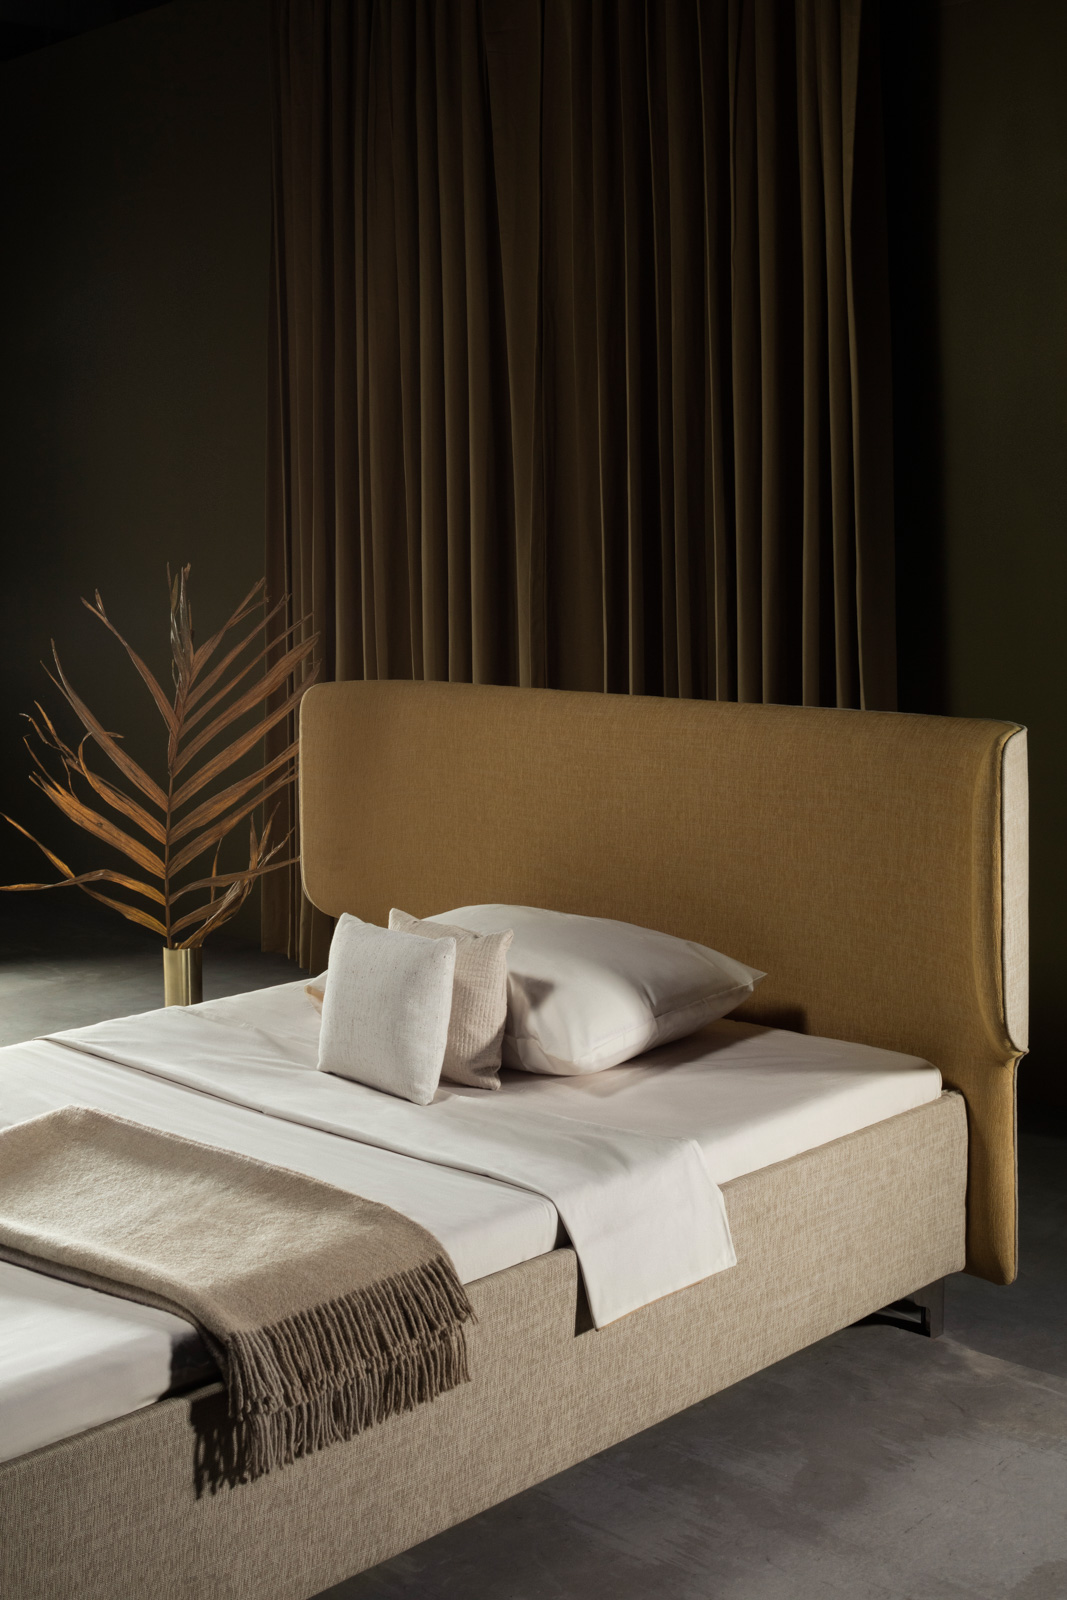 With a gently curved headboard, made of a wooden panel covered with a soft layering of foam, the ‘Cetus’ single bed by Anne Claire Hostequin from France has a no-frills design propped on chrome legs. Want a more luxurious rendition? You may choose to upholster it with Kvadrat textiles or Sorensen Royal Nubuck leather.